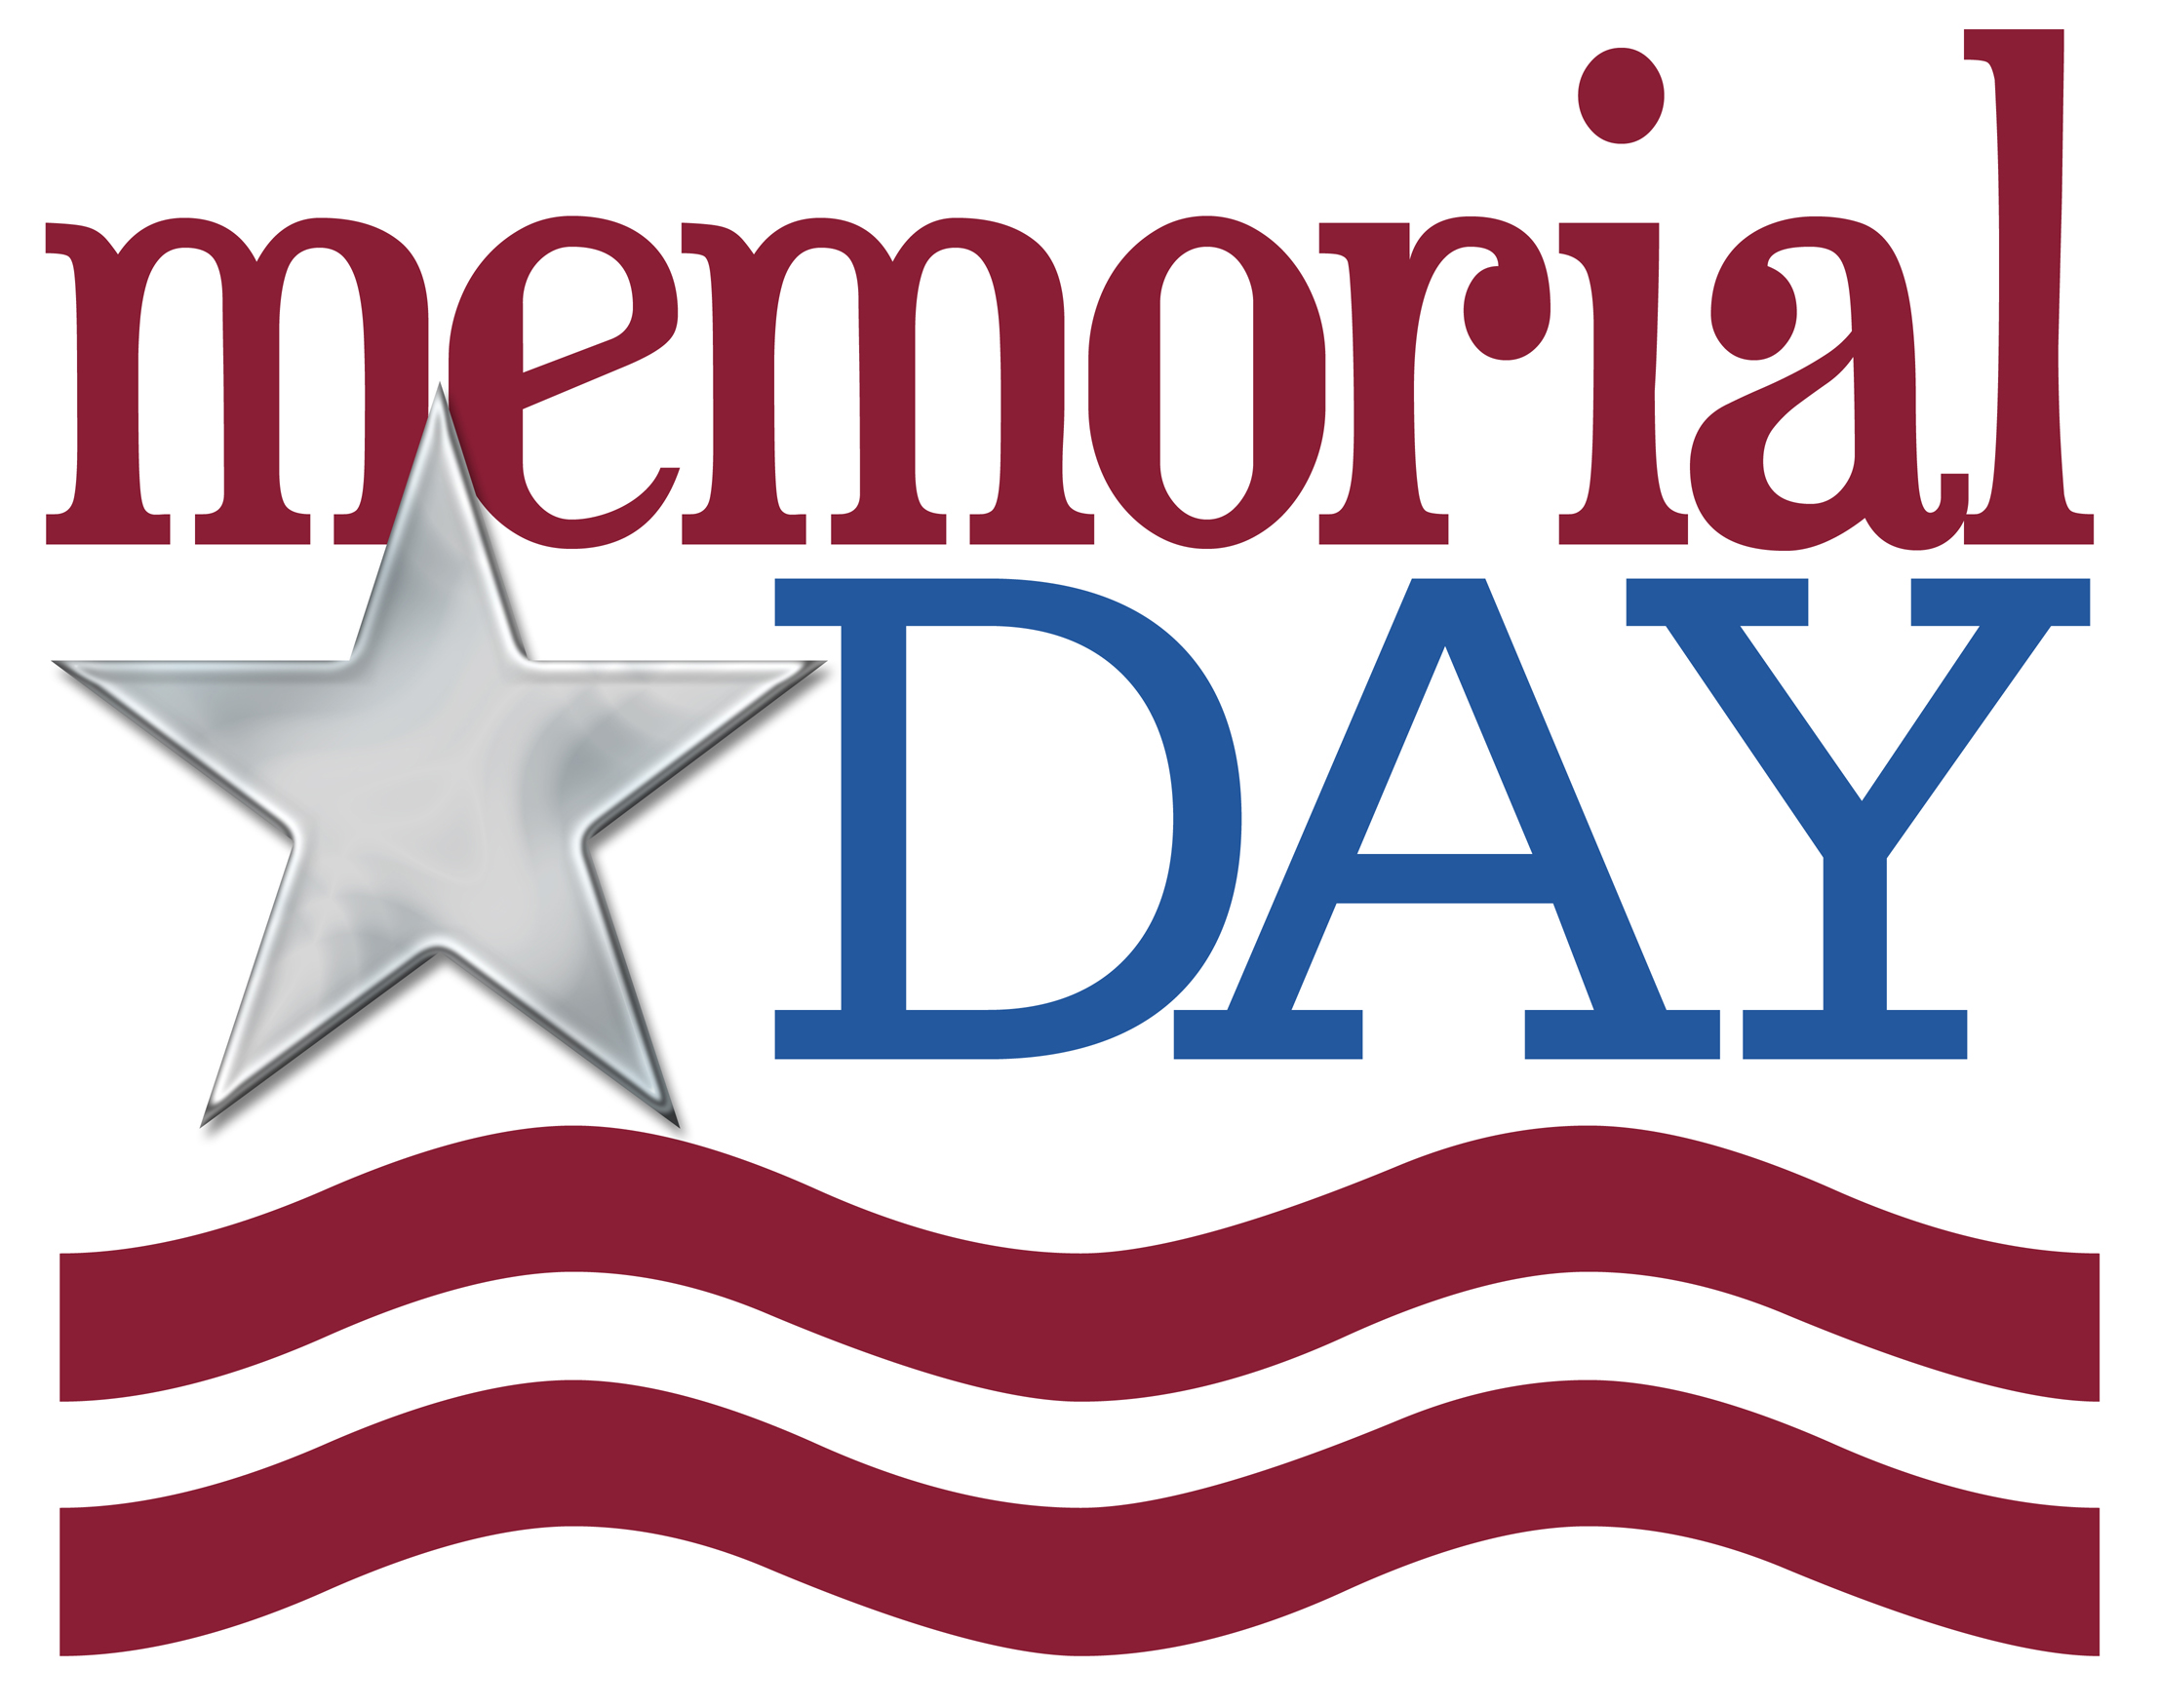 Memorial Day Clip Art Memorial Day Clip Art Memorial Day